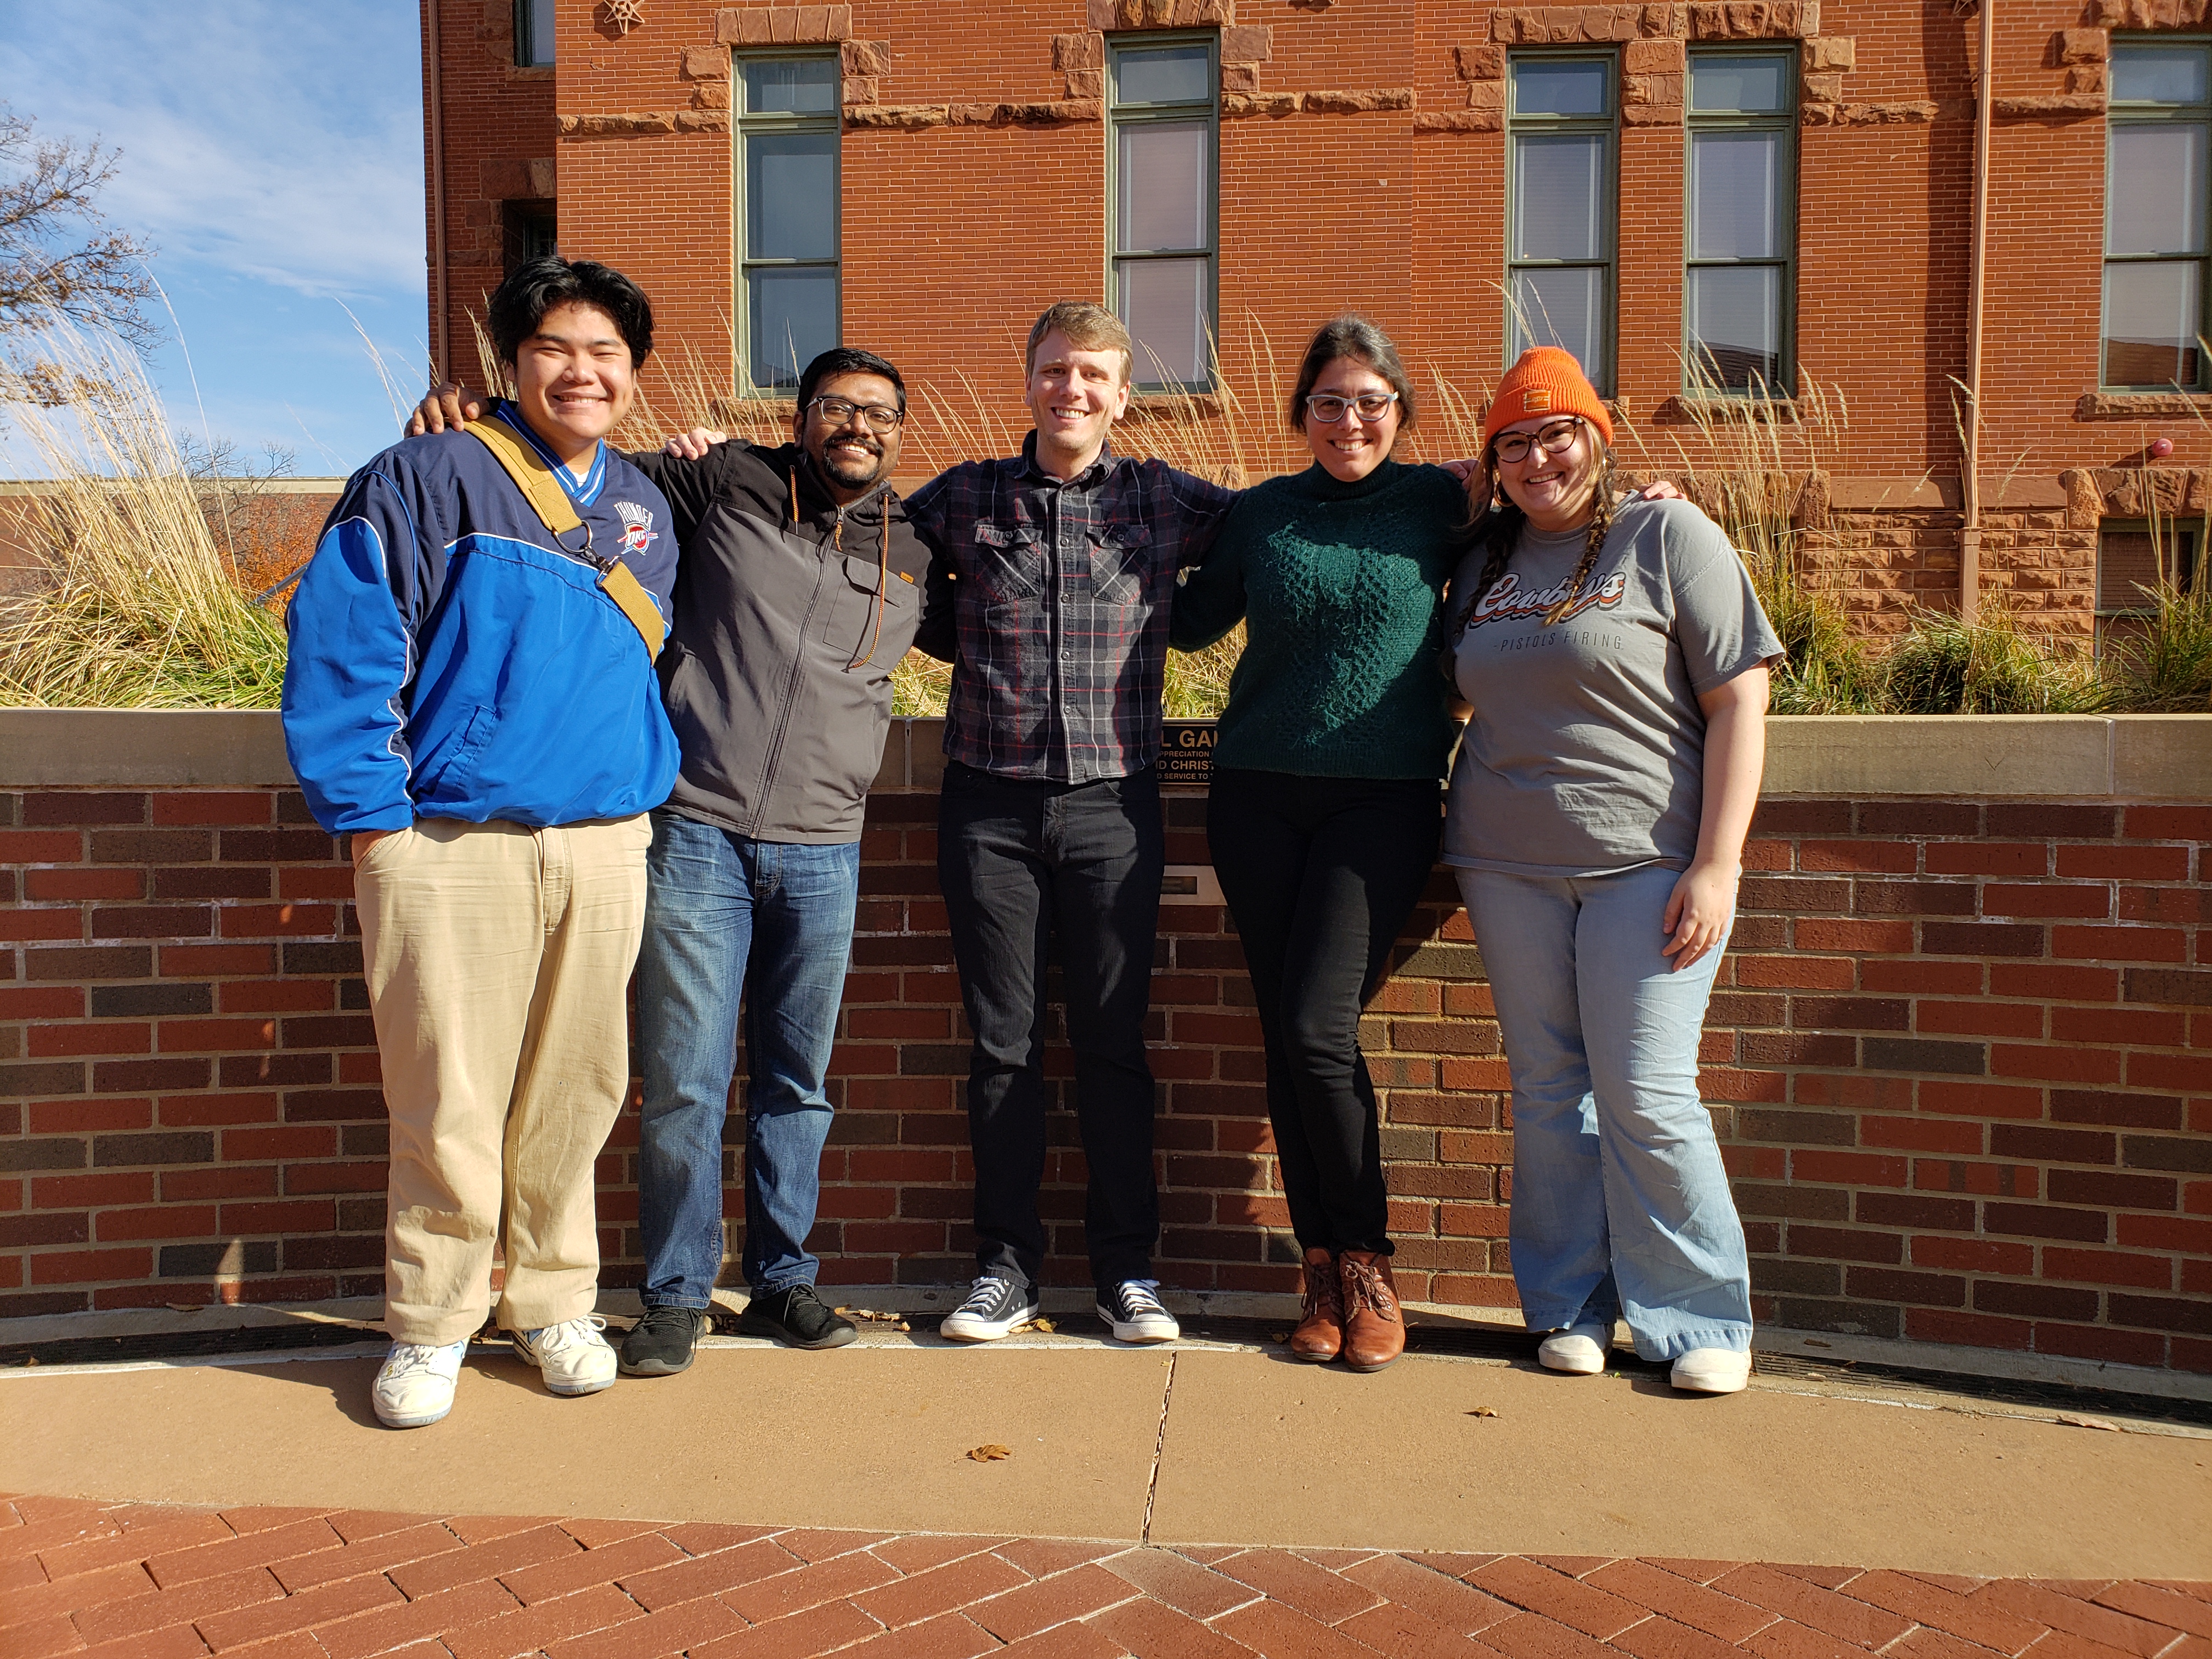 Photograph of Jonathan, Niladri, Reed, Mercedes, and Madeline standing together in front of a brick building on the Stillwater campus.